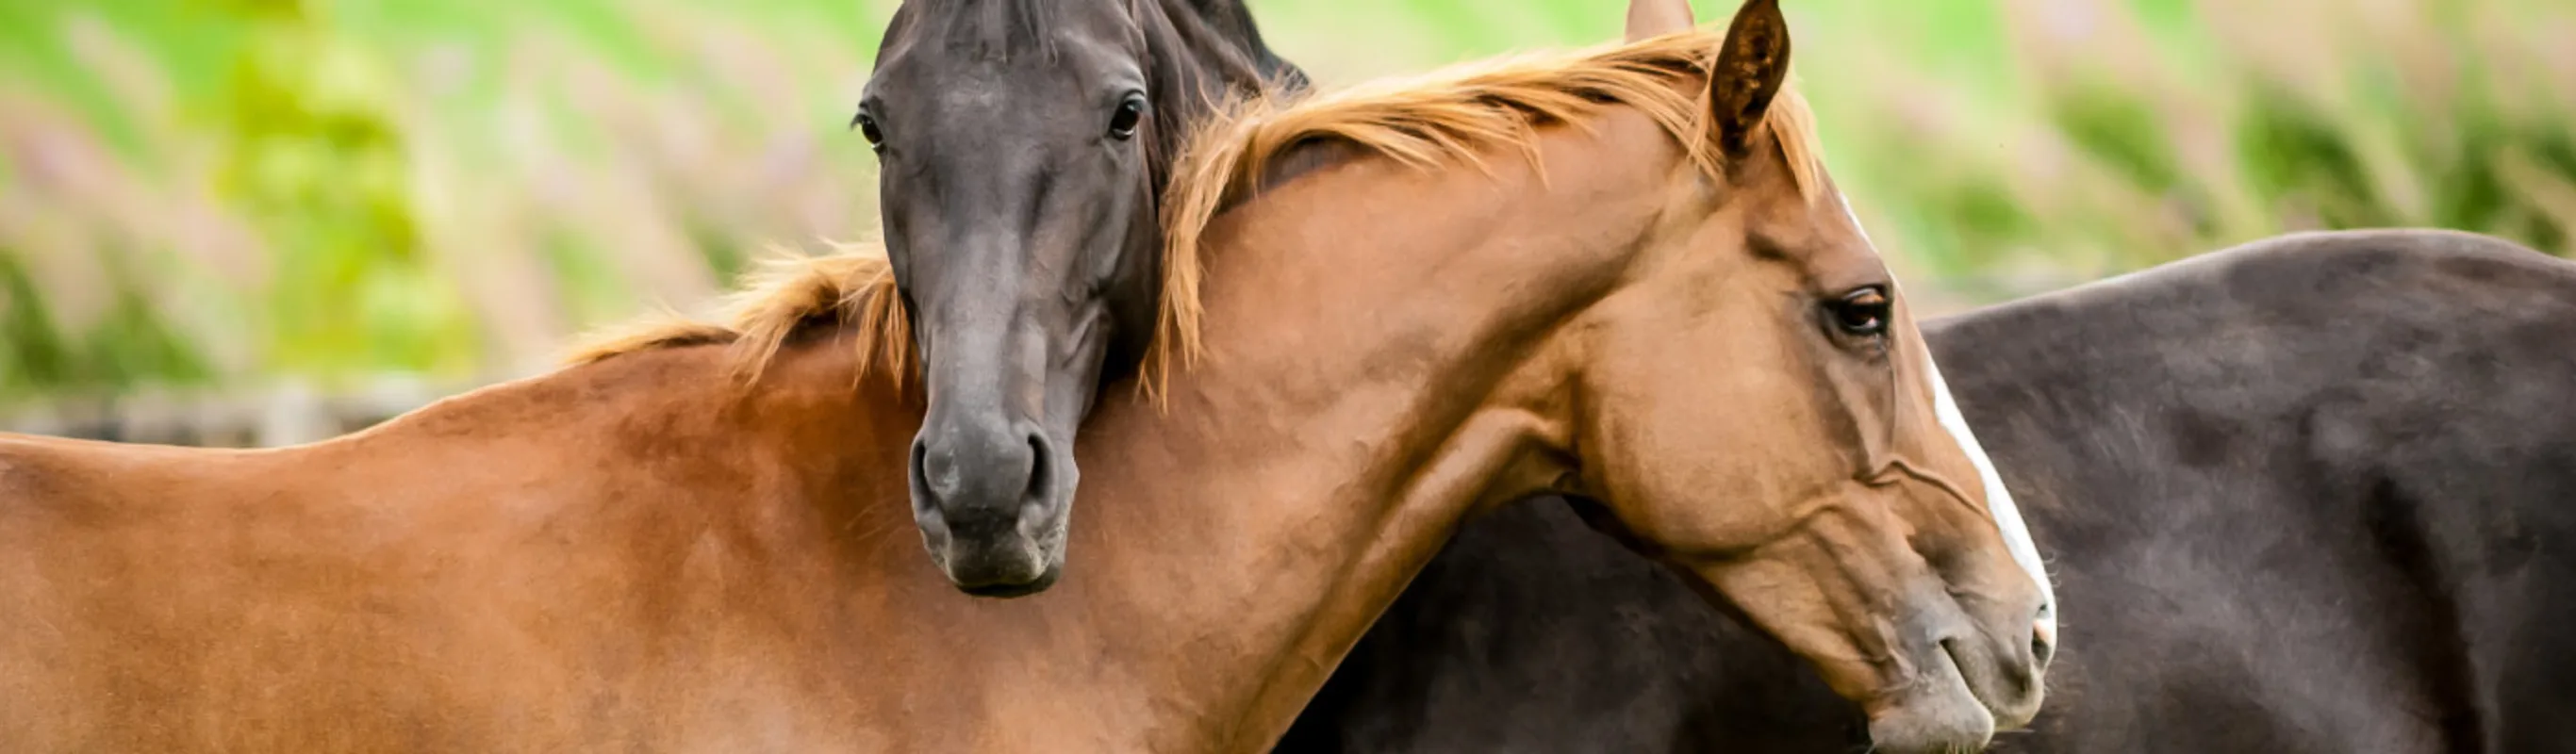 Two Horses embracing in a grassy field